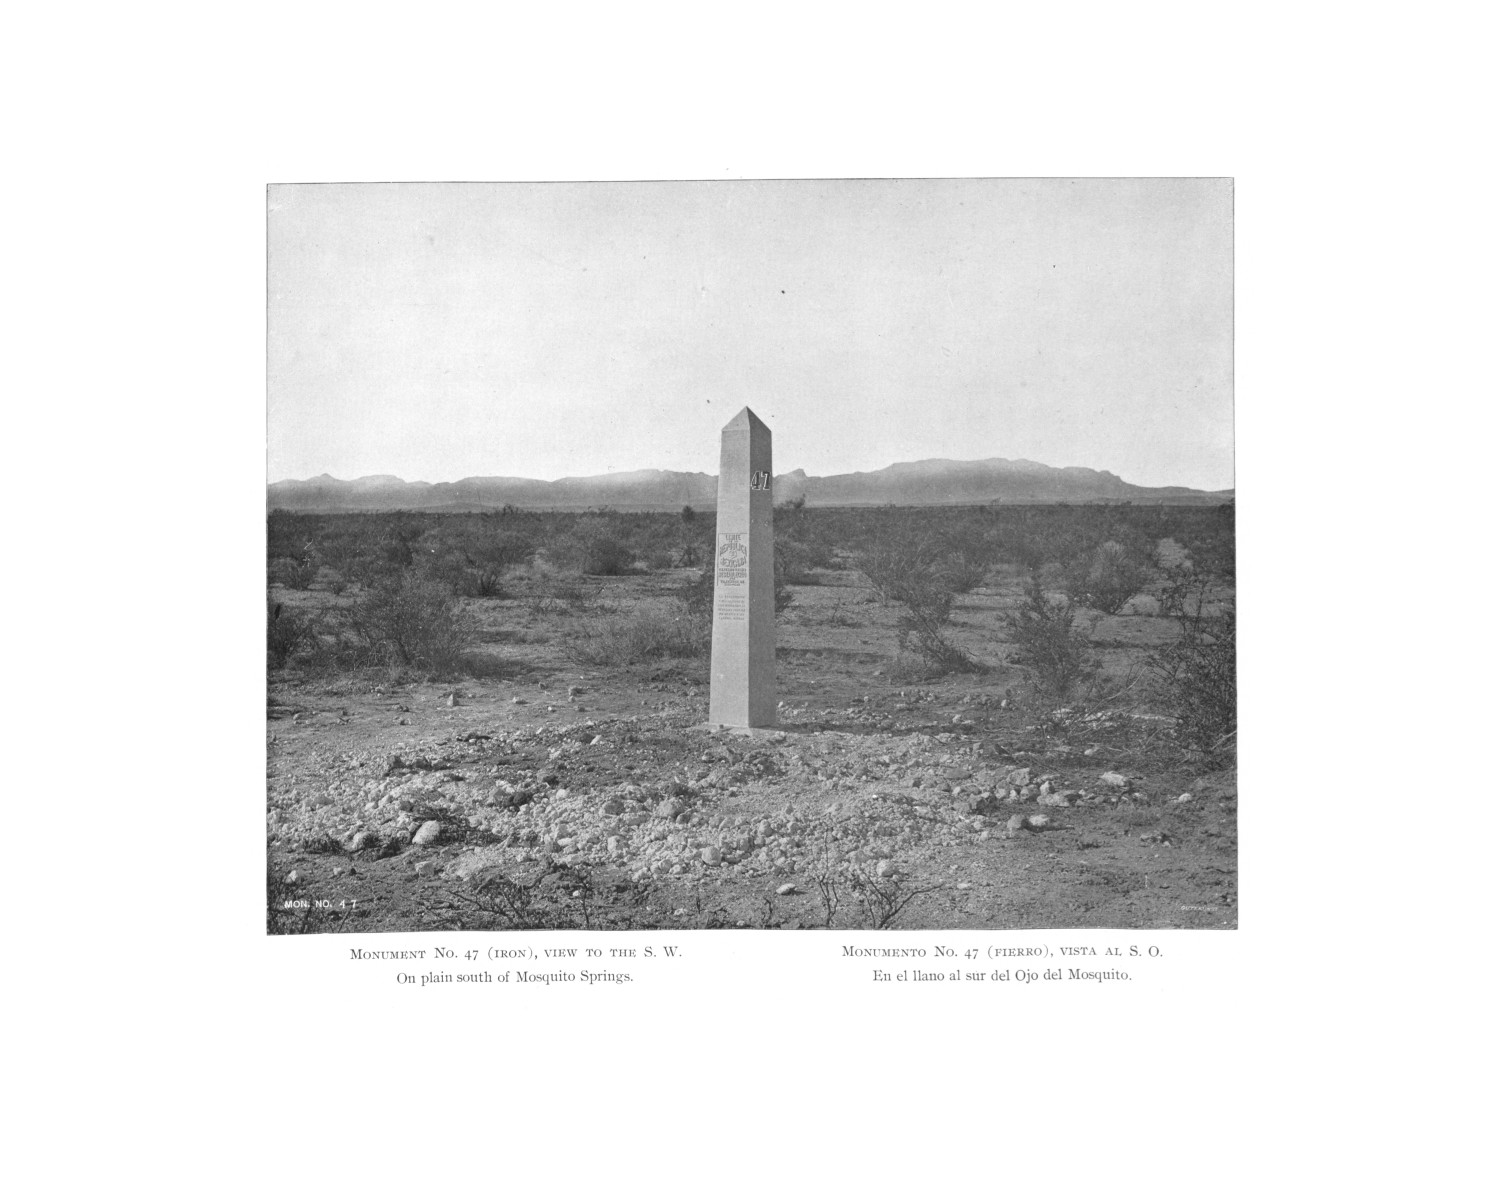 Report of the Boundary Commission Upon the Survey and Re-Marking of the Boundary Between the United States and Mexico West of the Rio Grande, 1891-1896. Album
                                                
                                                    [Sequence #]: 49 of 260
                                                